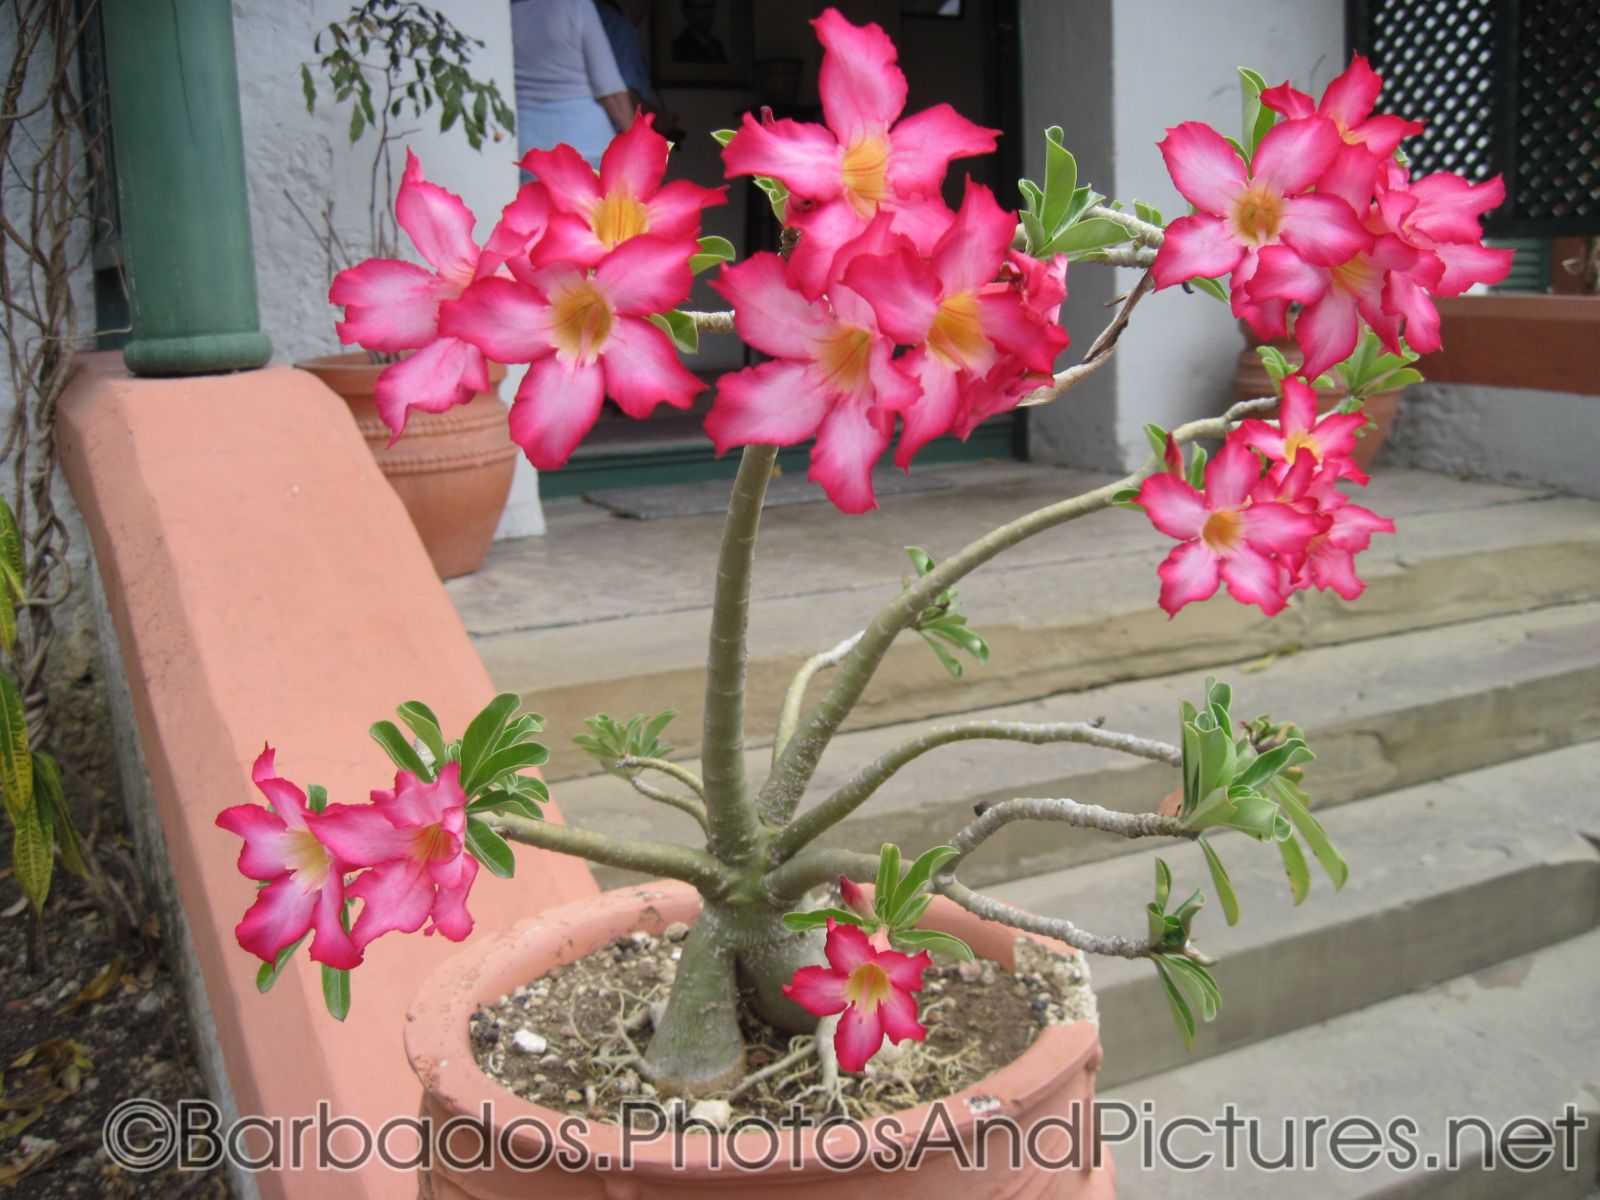 5 petal pink flower plant in a pot at Tyrol Cot in Barbados.jpg
